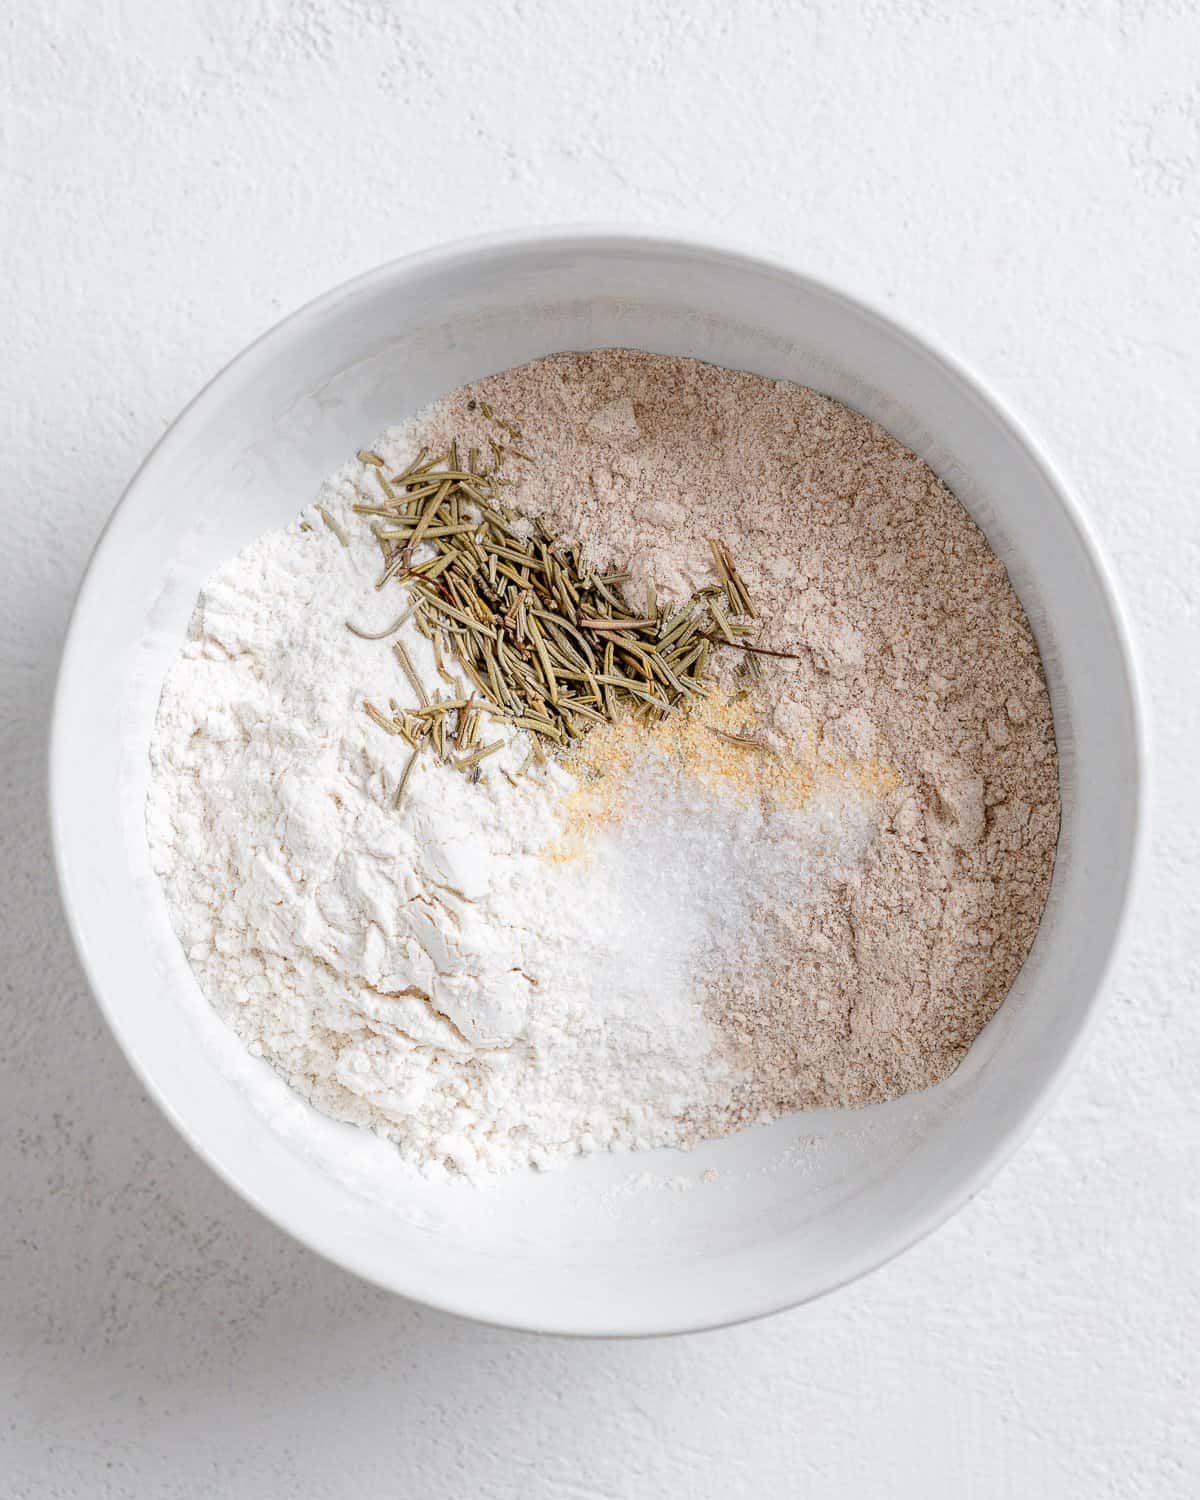 process of the addition of flour and spices in a white bowl against a white background